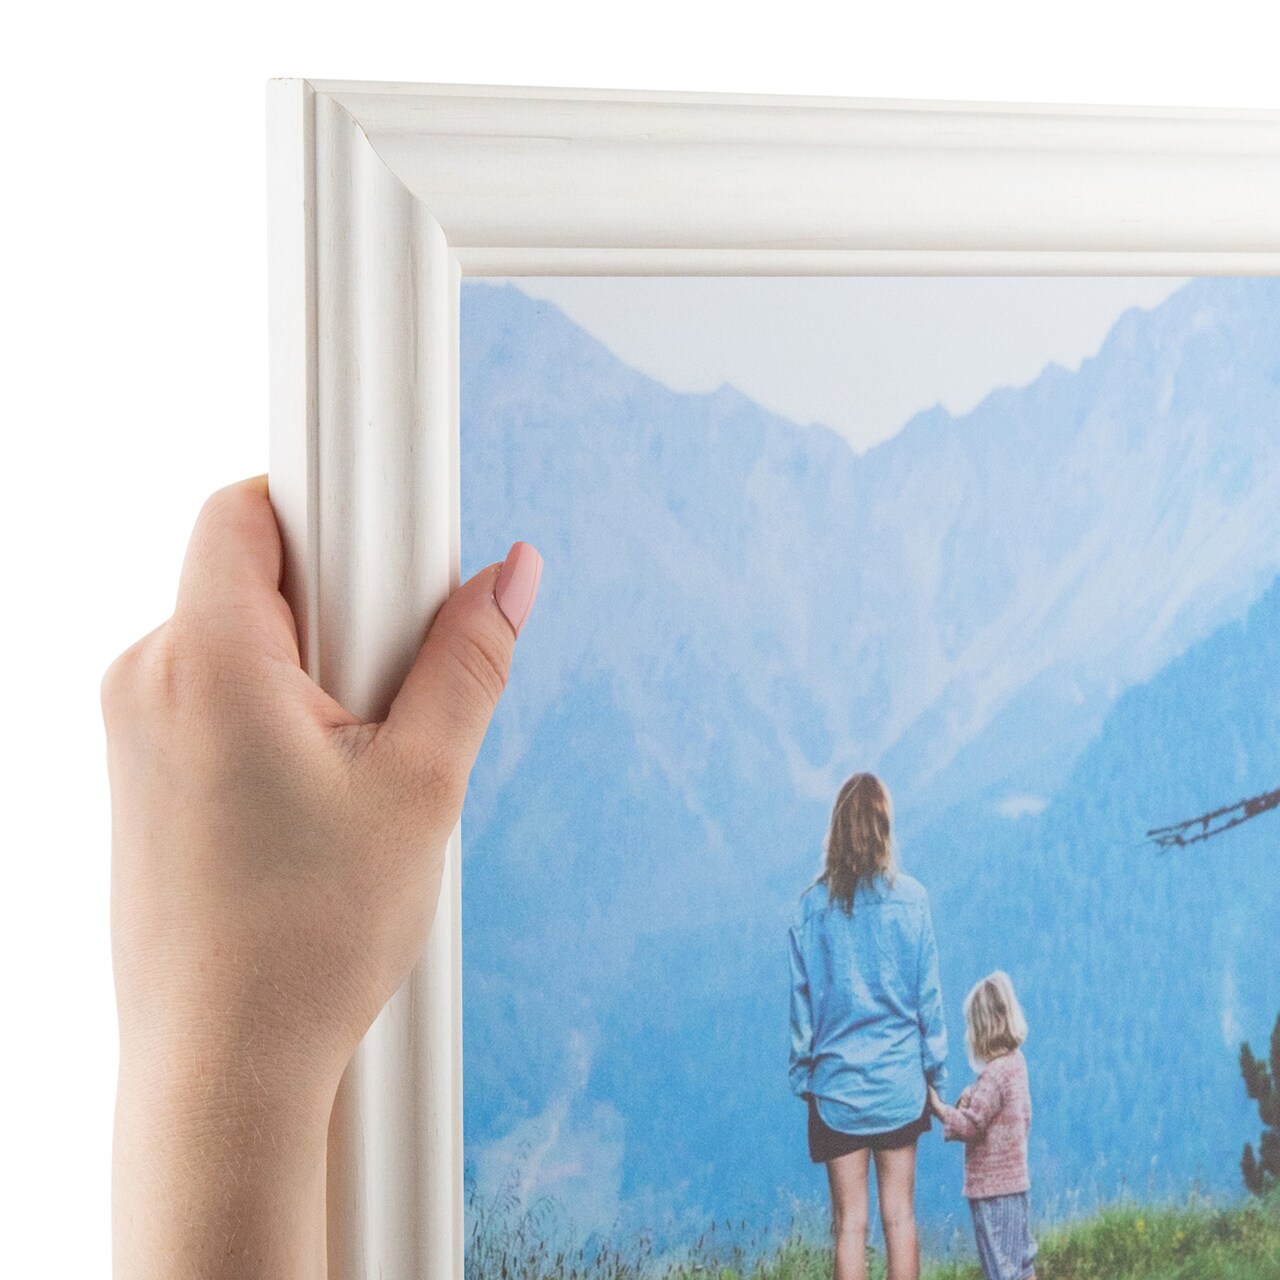 ArtToFrames 18x22 Inch  Picture Frame, This 1.5 Inch Custom Wood Poster Frame is Available in Multiple Colors, Great for Your Art or Photos - Comes with 060 Plexi Glass and  Corrugated Backing (A7NL)